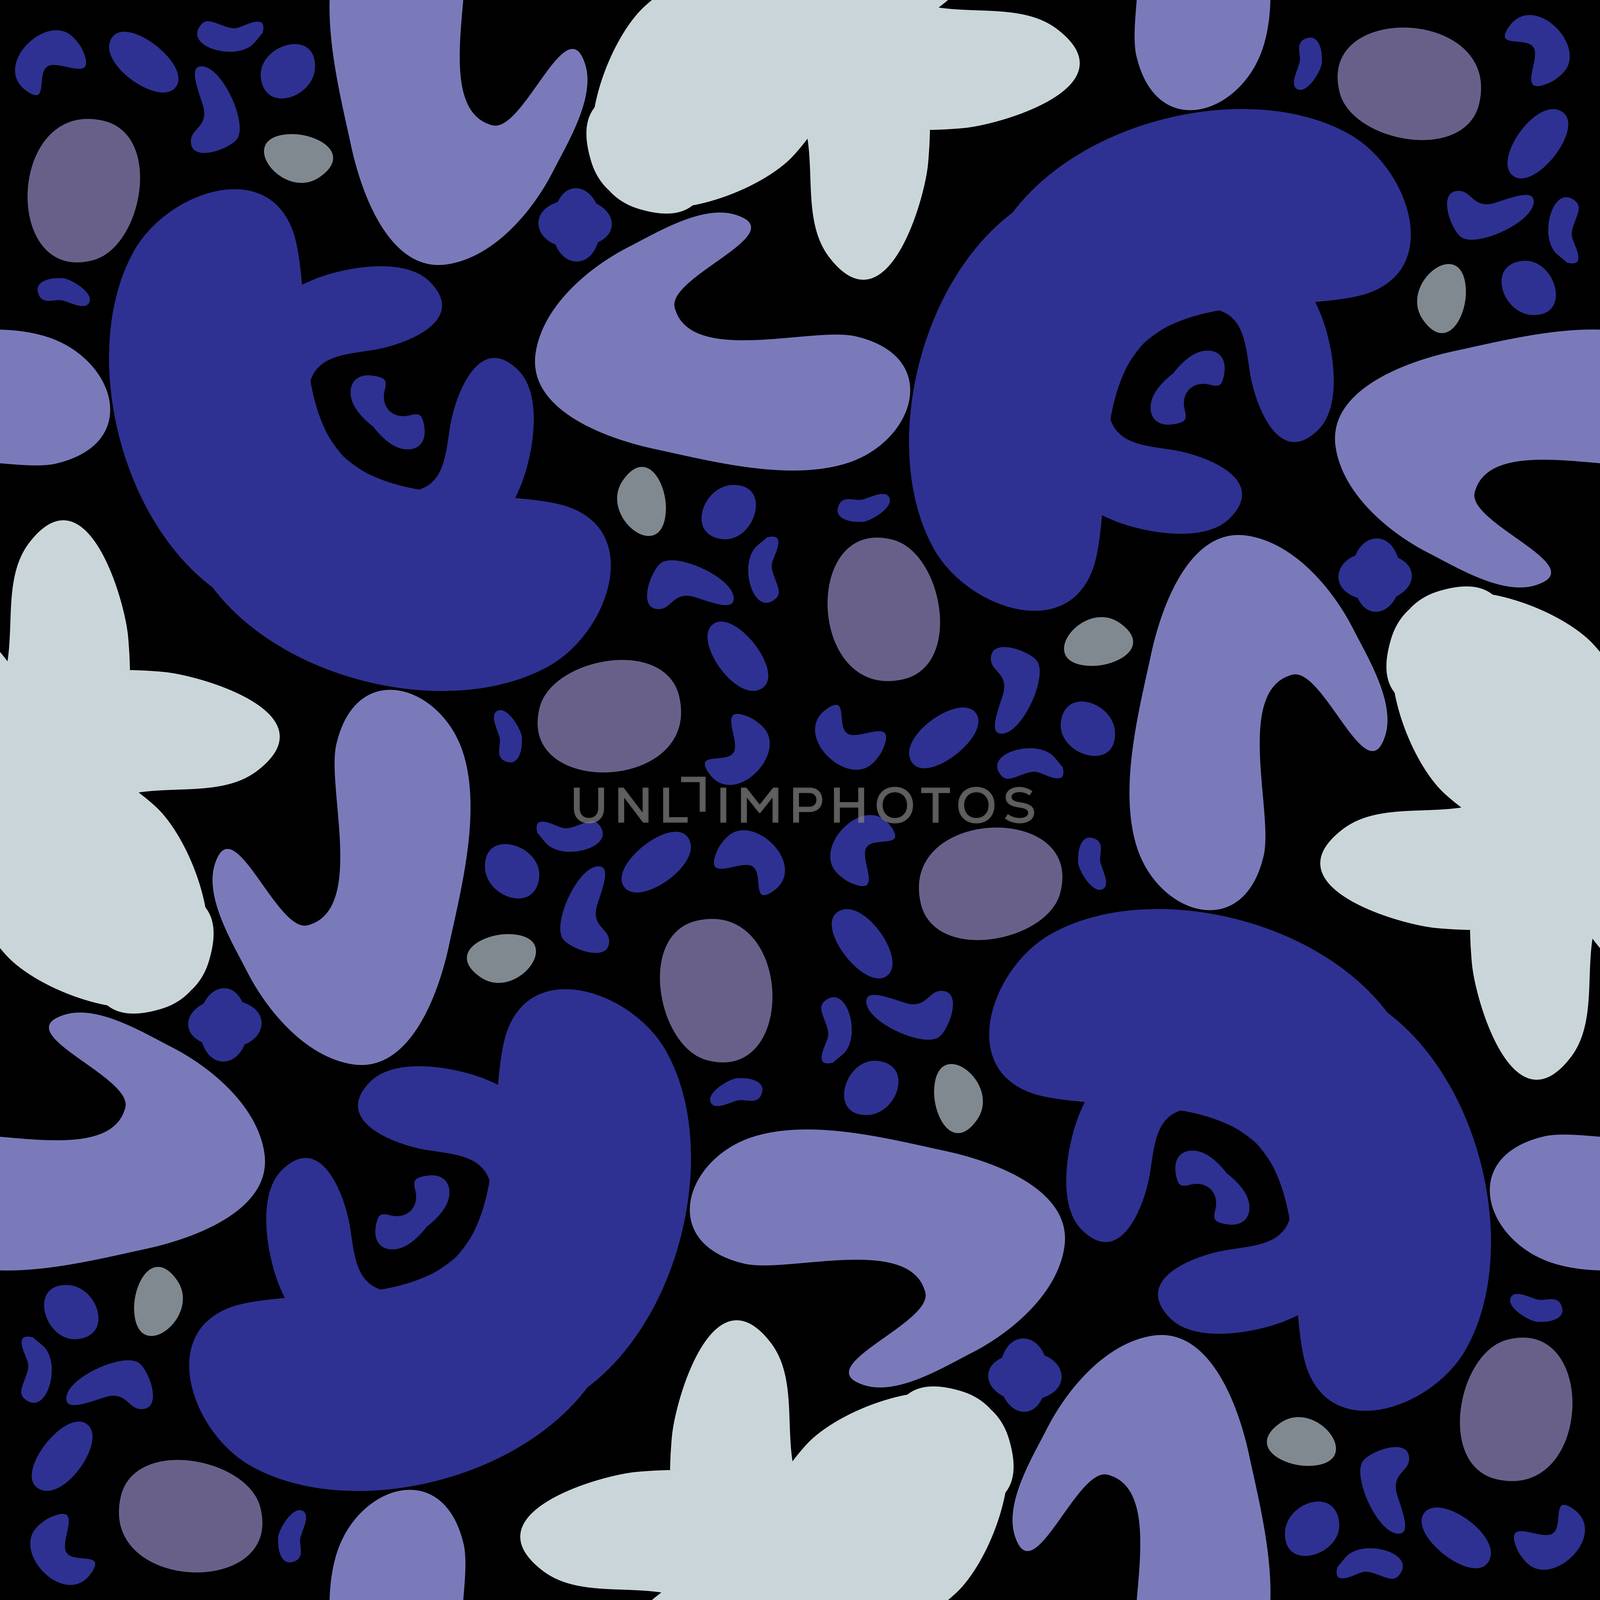 Repeating Tiled Blue Shapes by TheBlackRhino